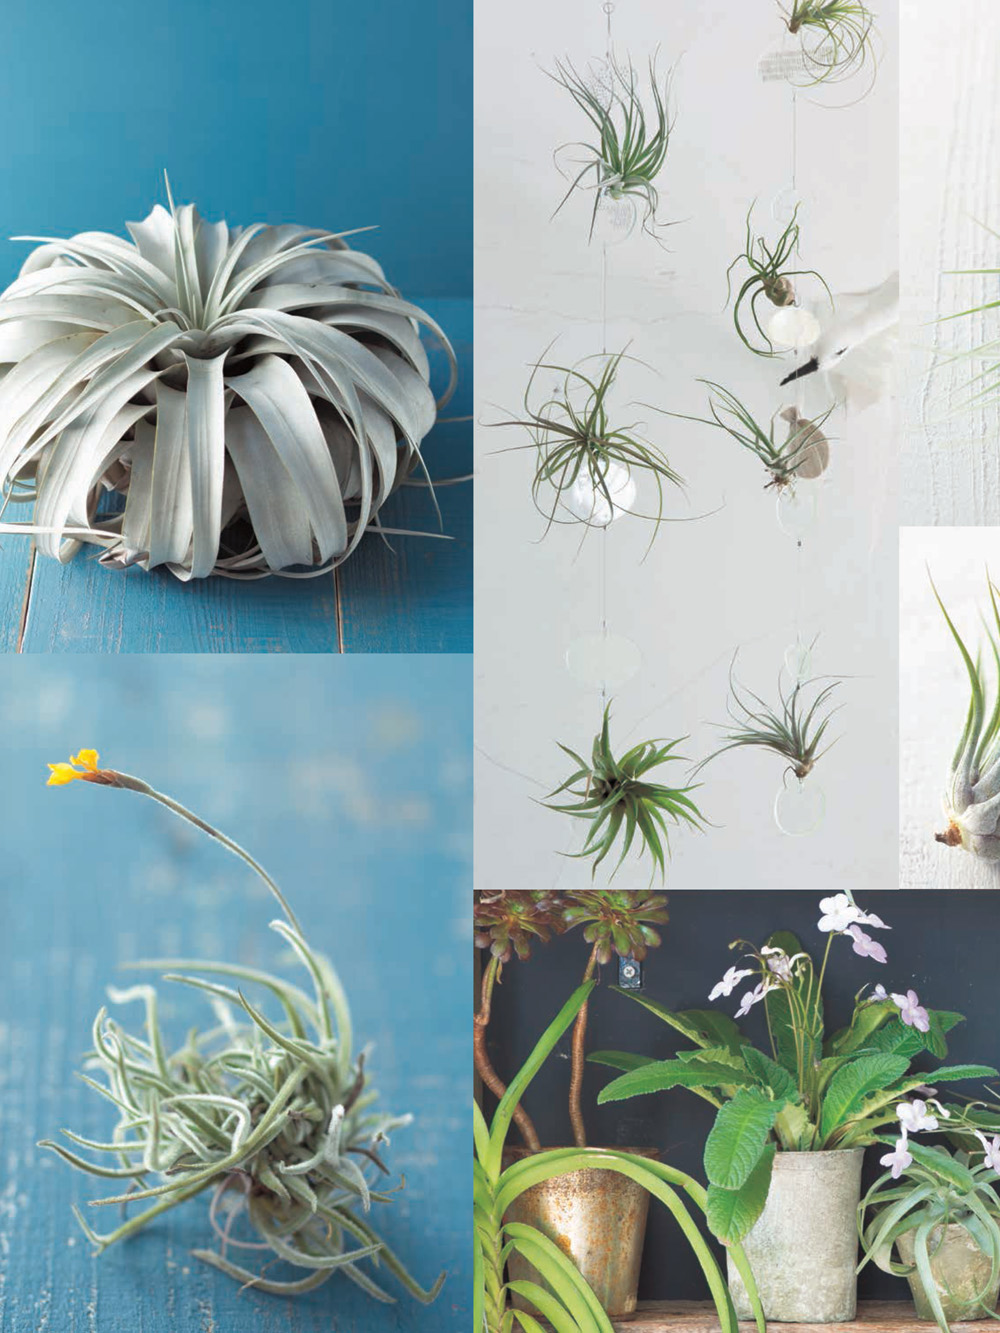 LIVING WITH AIR PLANTS A Beginners Guide to Growing and Displaying Tillandsia - photo 2